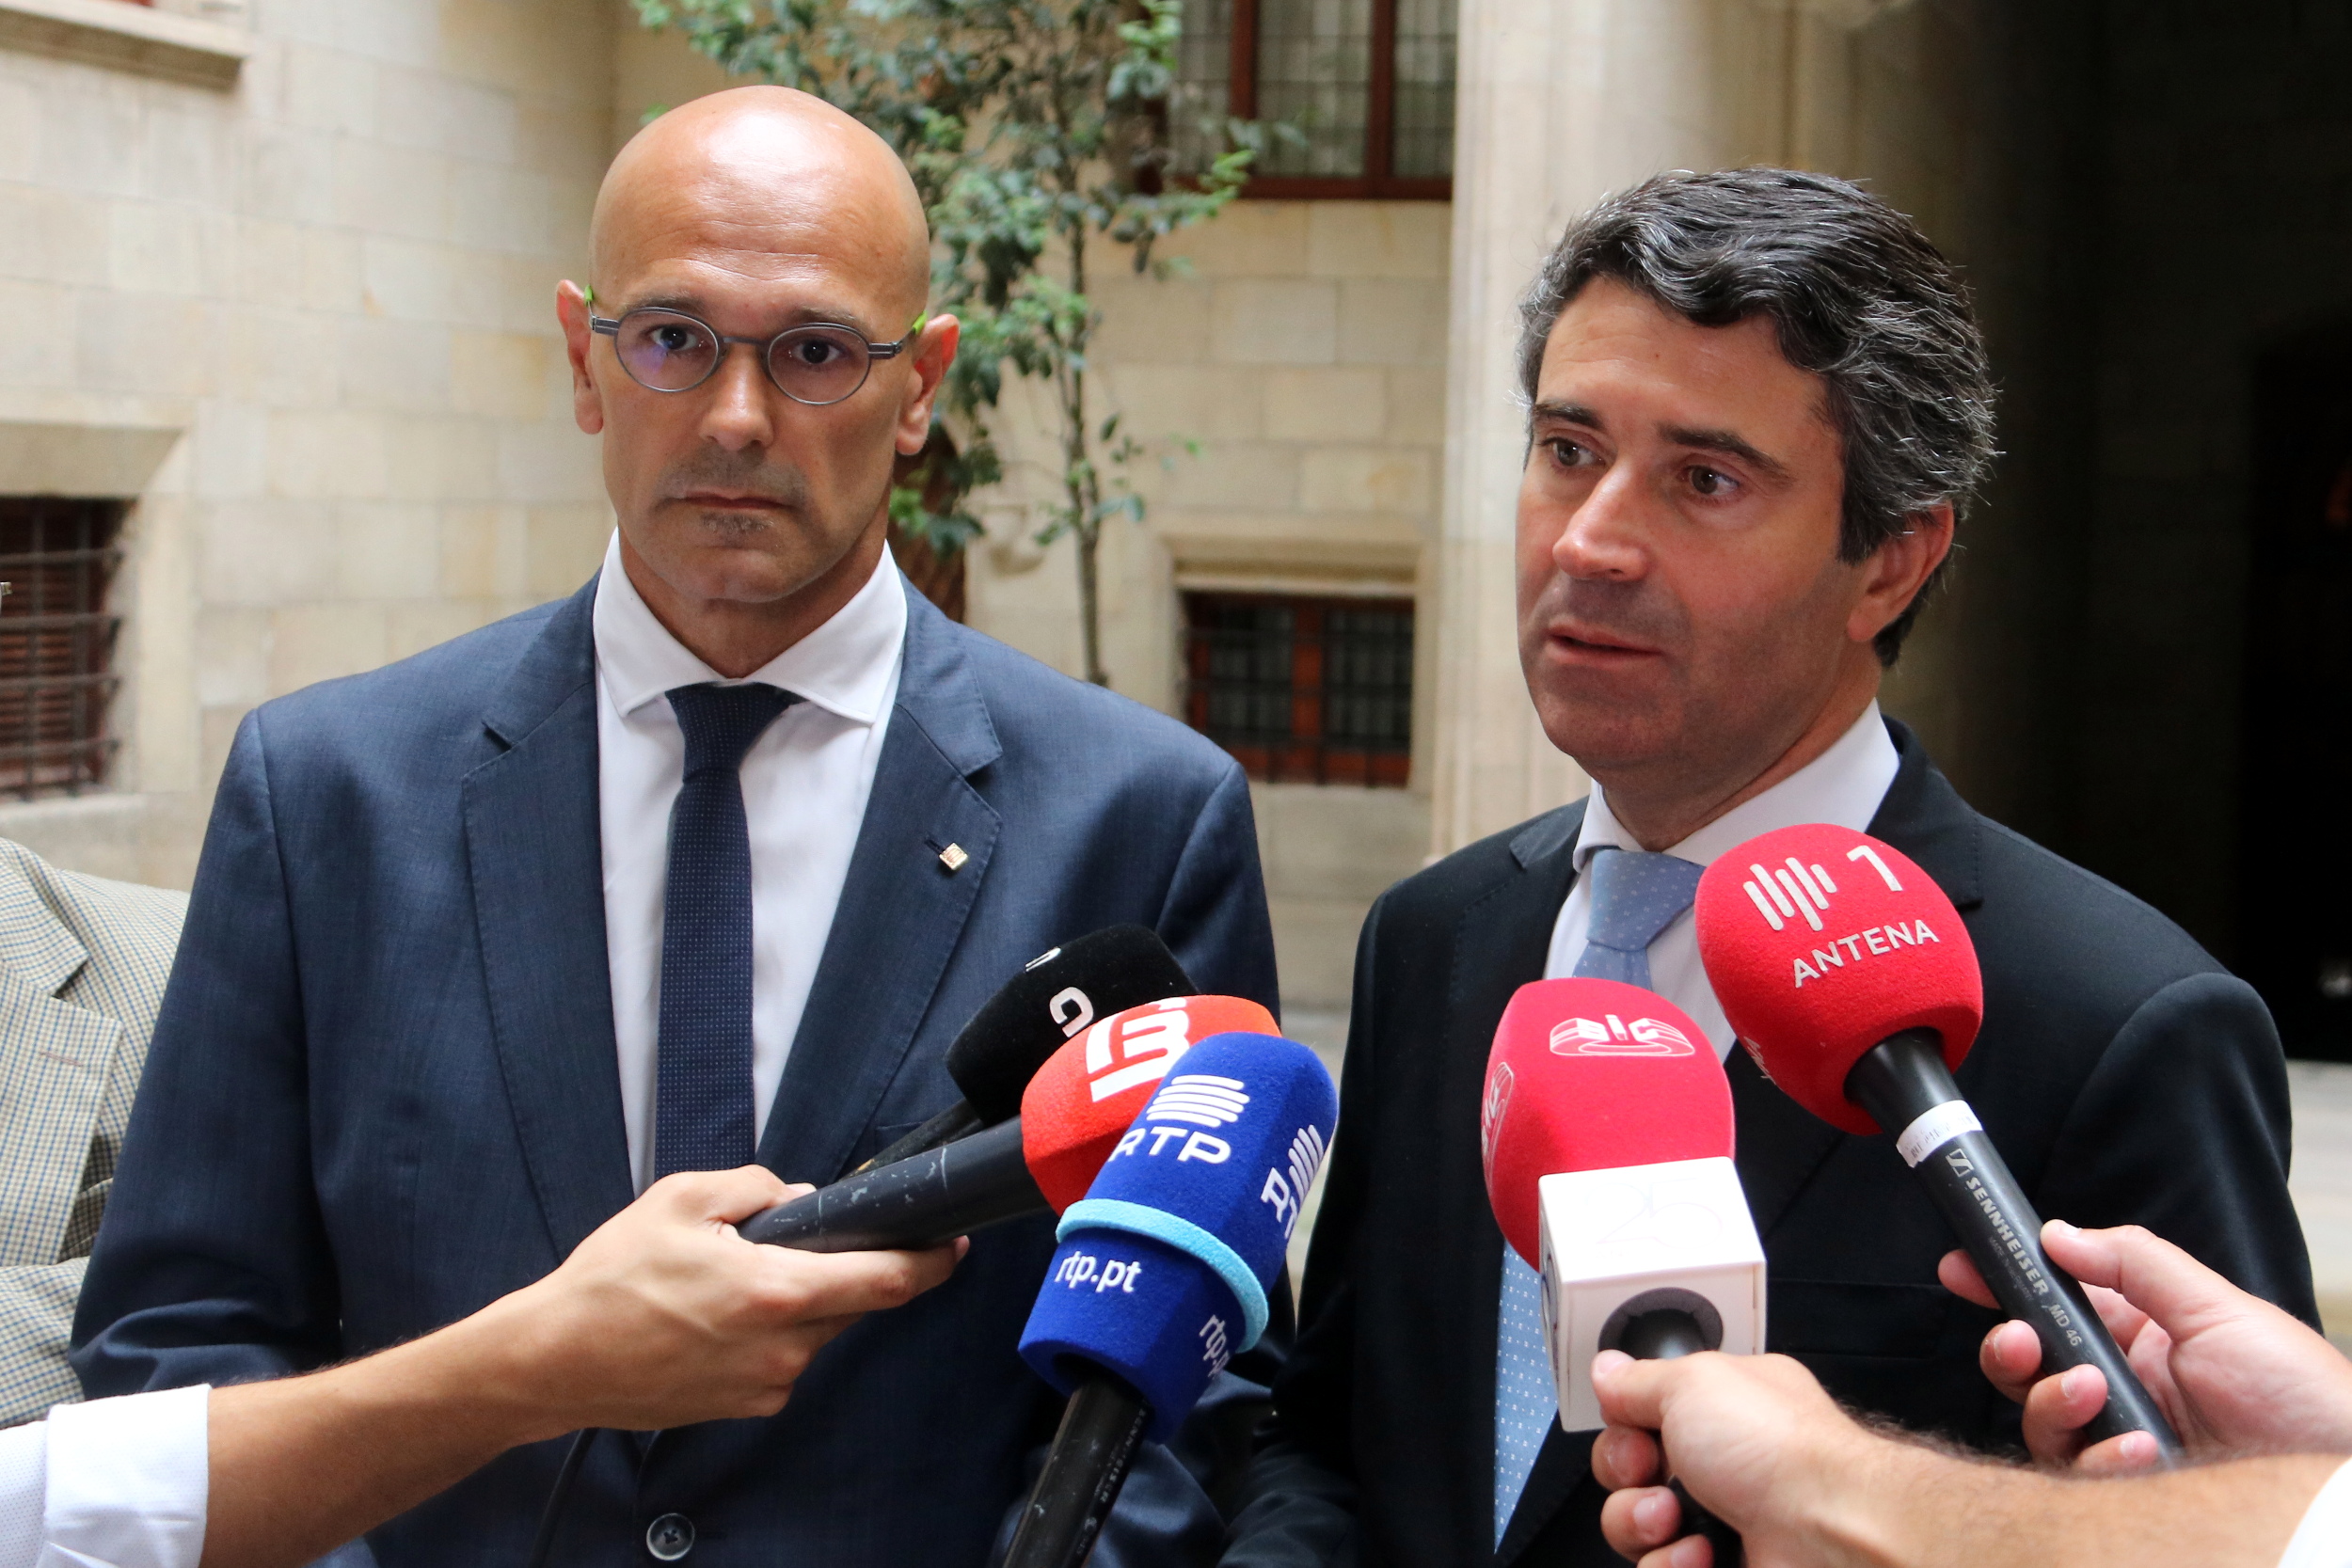 Catalan Foreign Affairs minister, Raül Romeva, and the Secretary of State of the Portuguese Communities, José Luis Carneiro